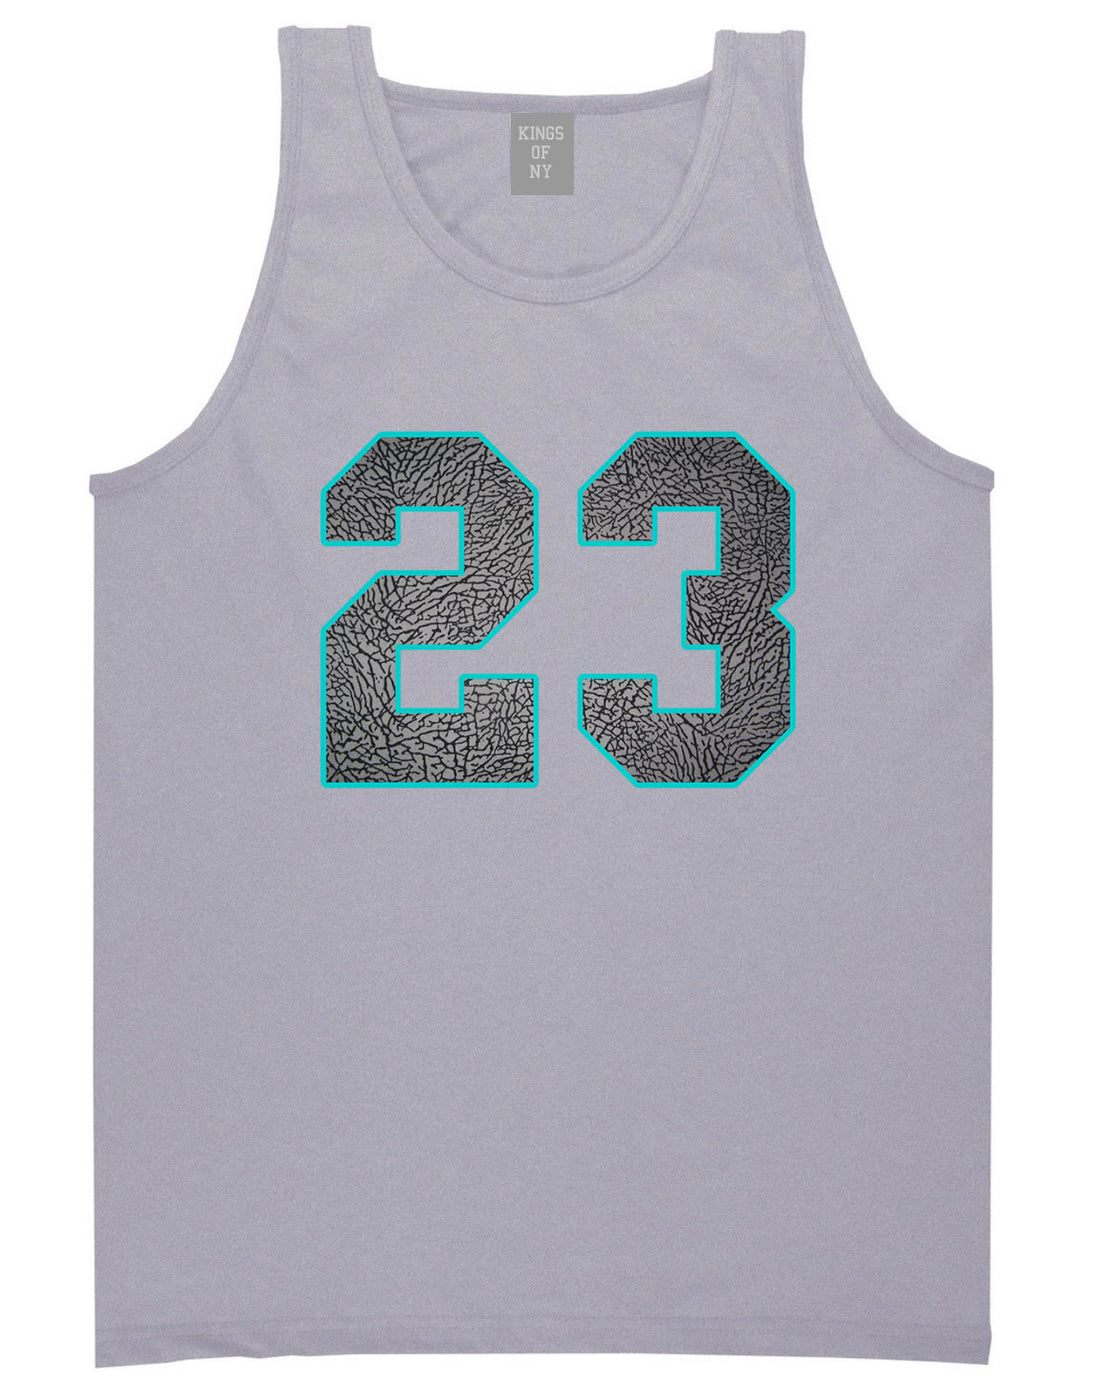 23 Cement Blue Jersey Tank Top in Grey By Kings Of NY